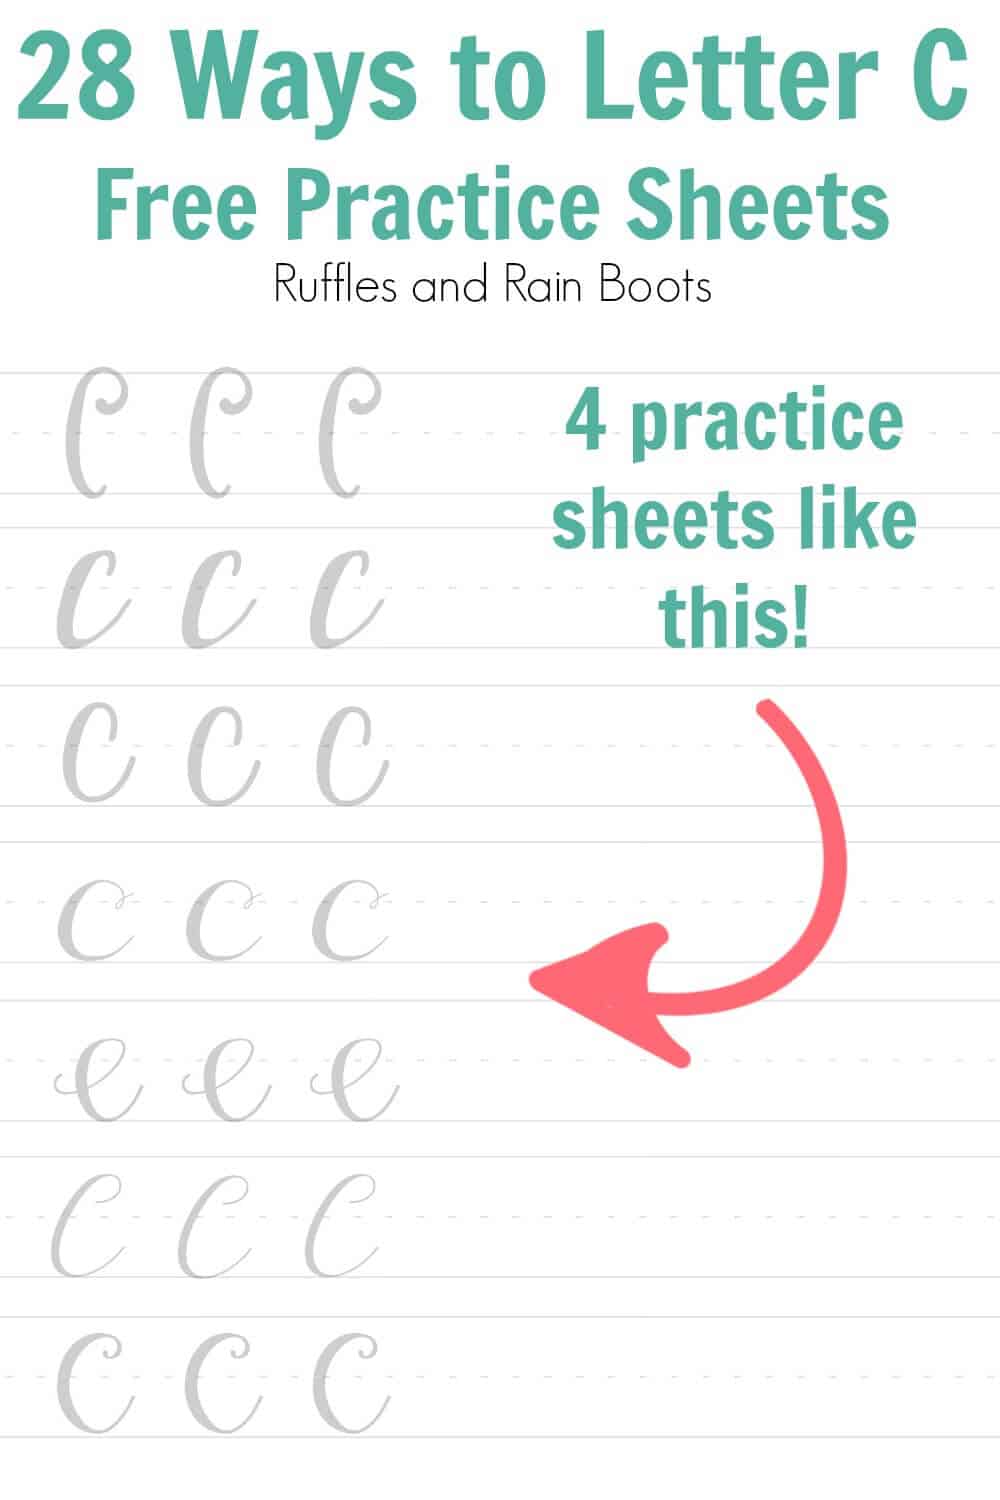 Learn how to letter C for brush calligraphy